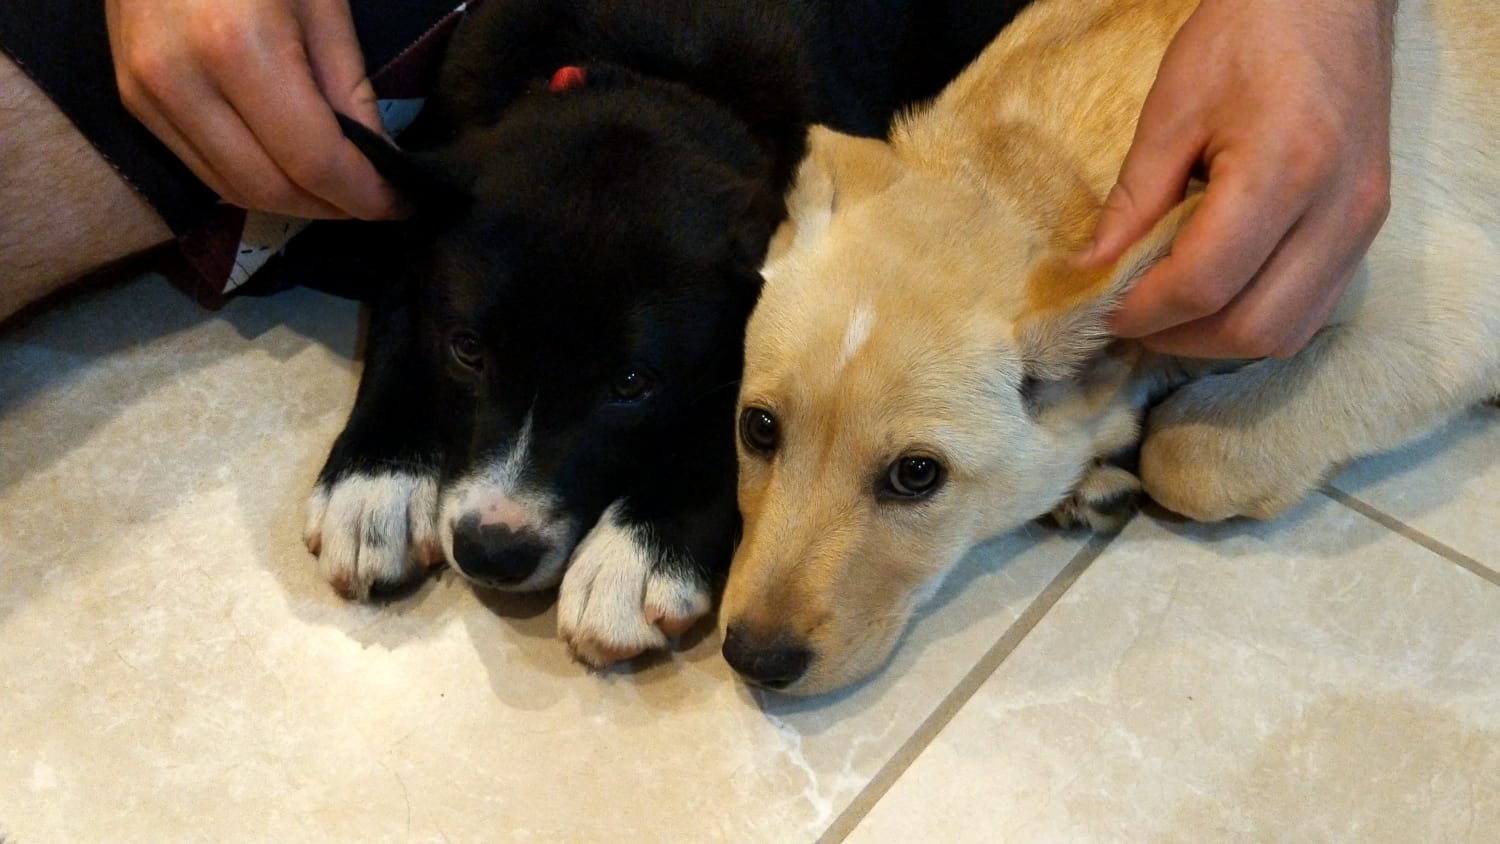 These two foster puppies rescued from a hoarder were so scared but they finally let me pet them.